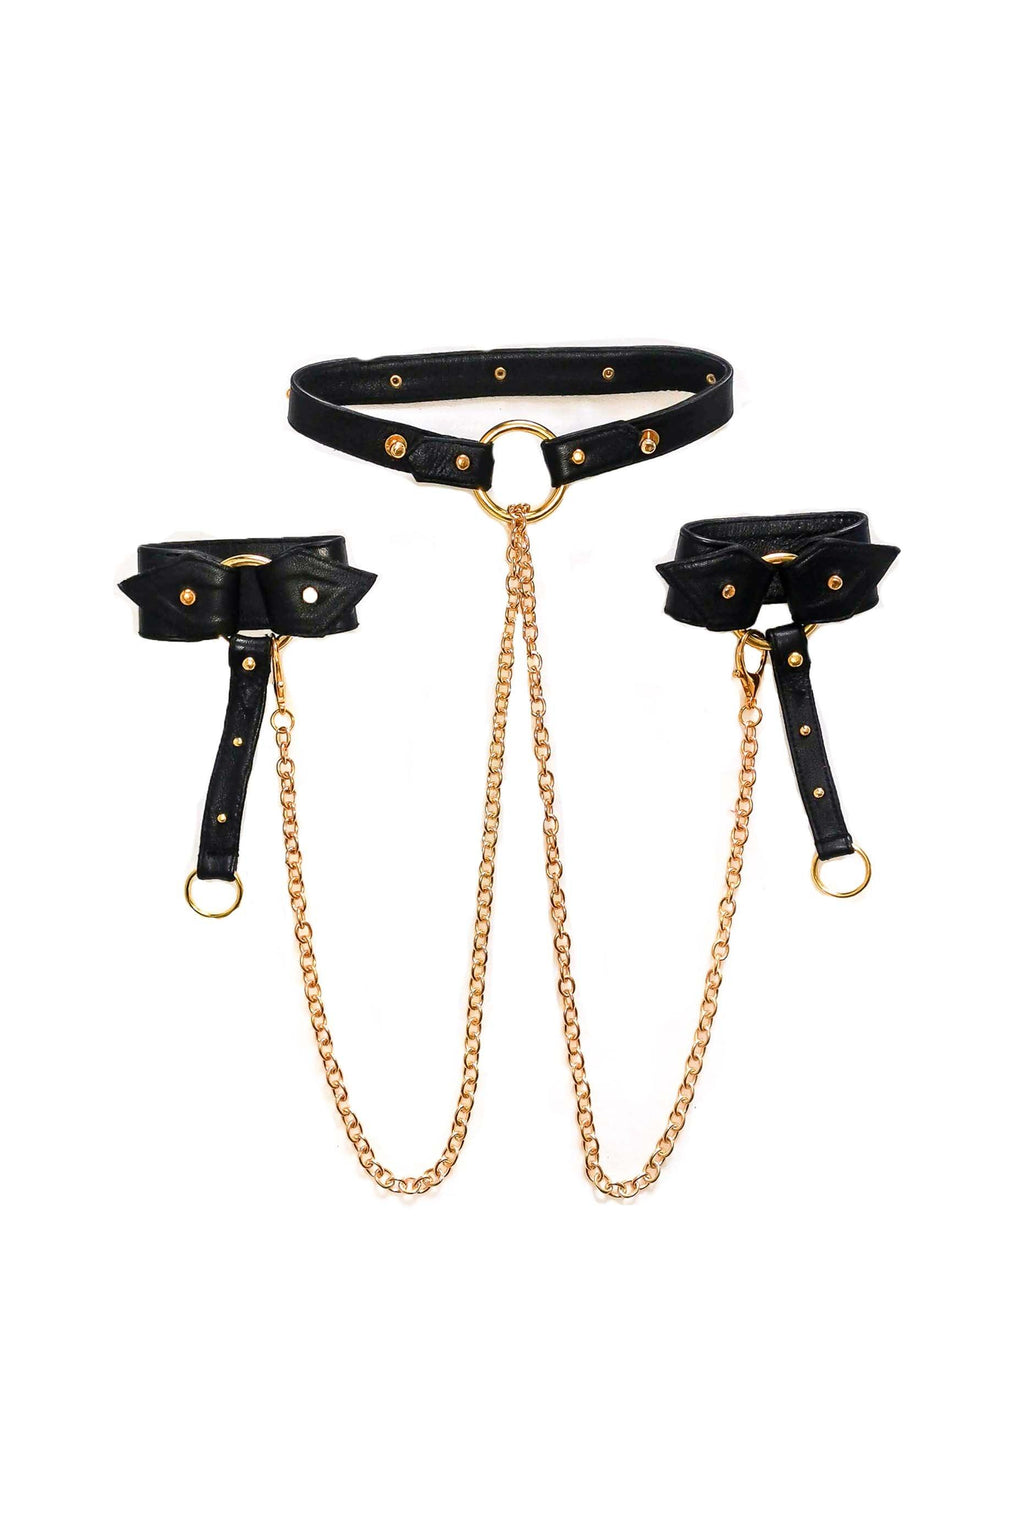 studded leather choker with gold studs with matching leather cuffs and gold plated chain